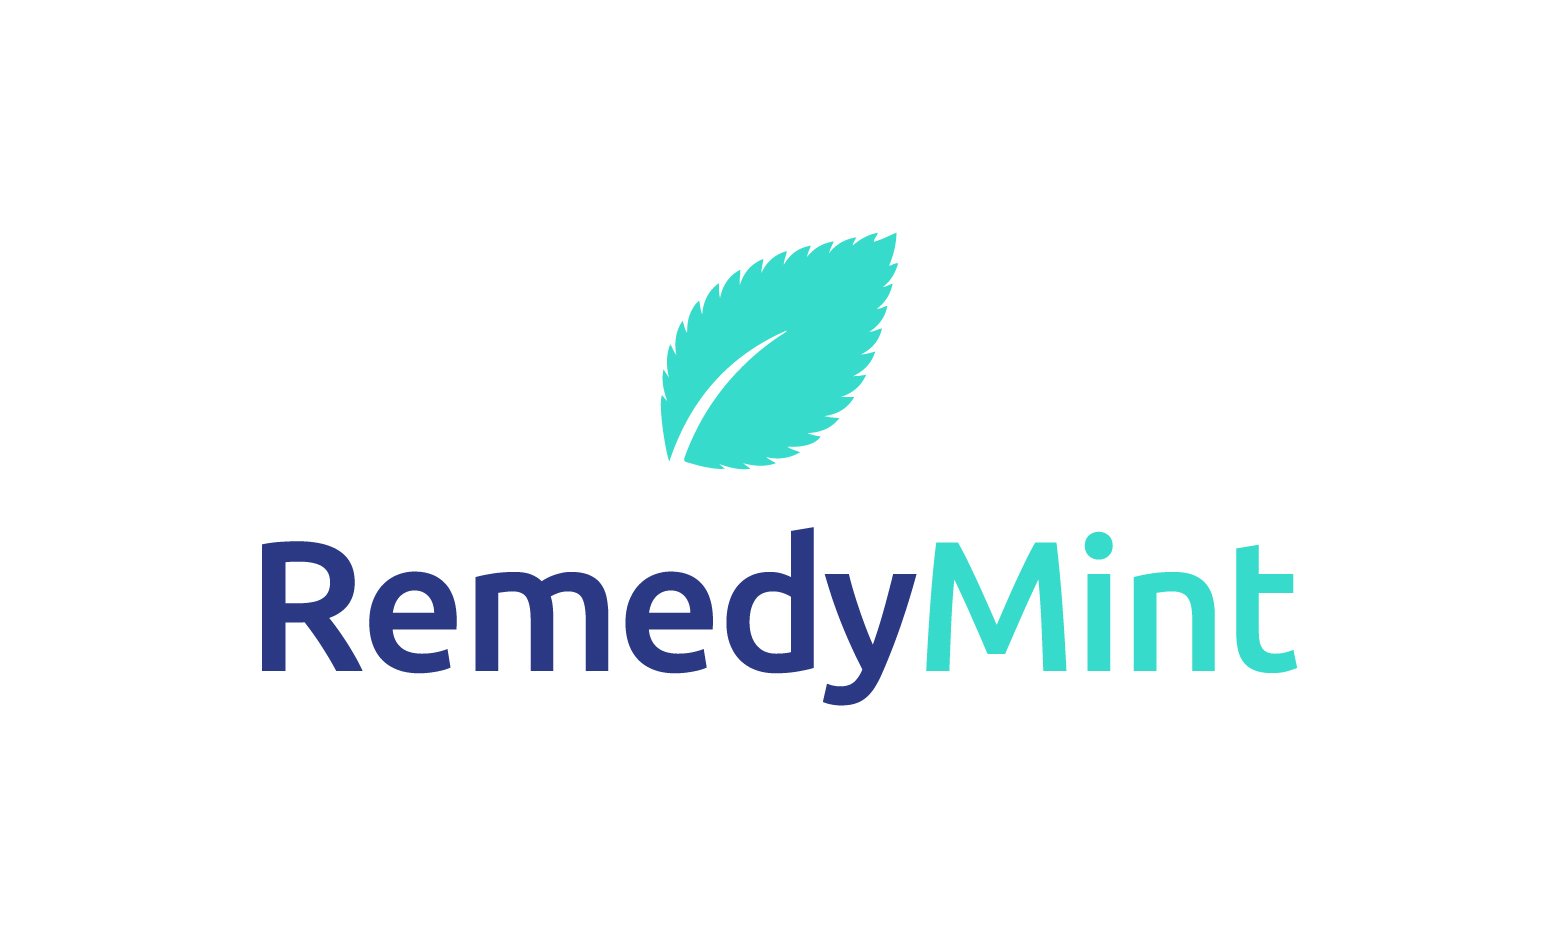 RemedyMint.com - Creative brandable domain for sale